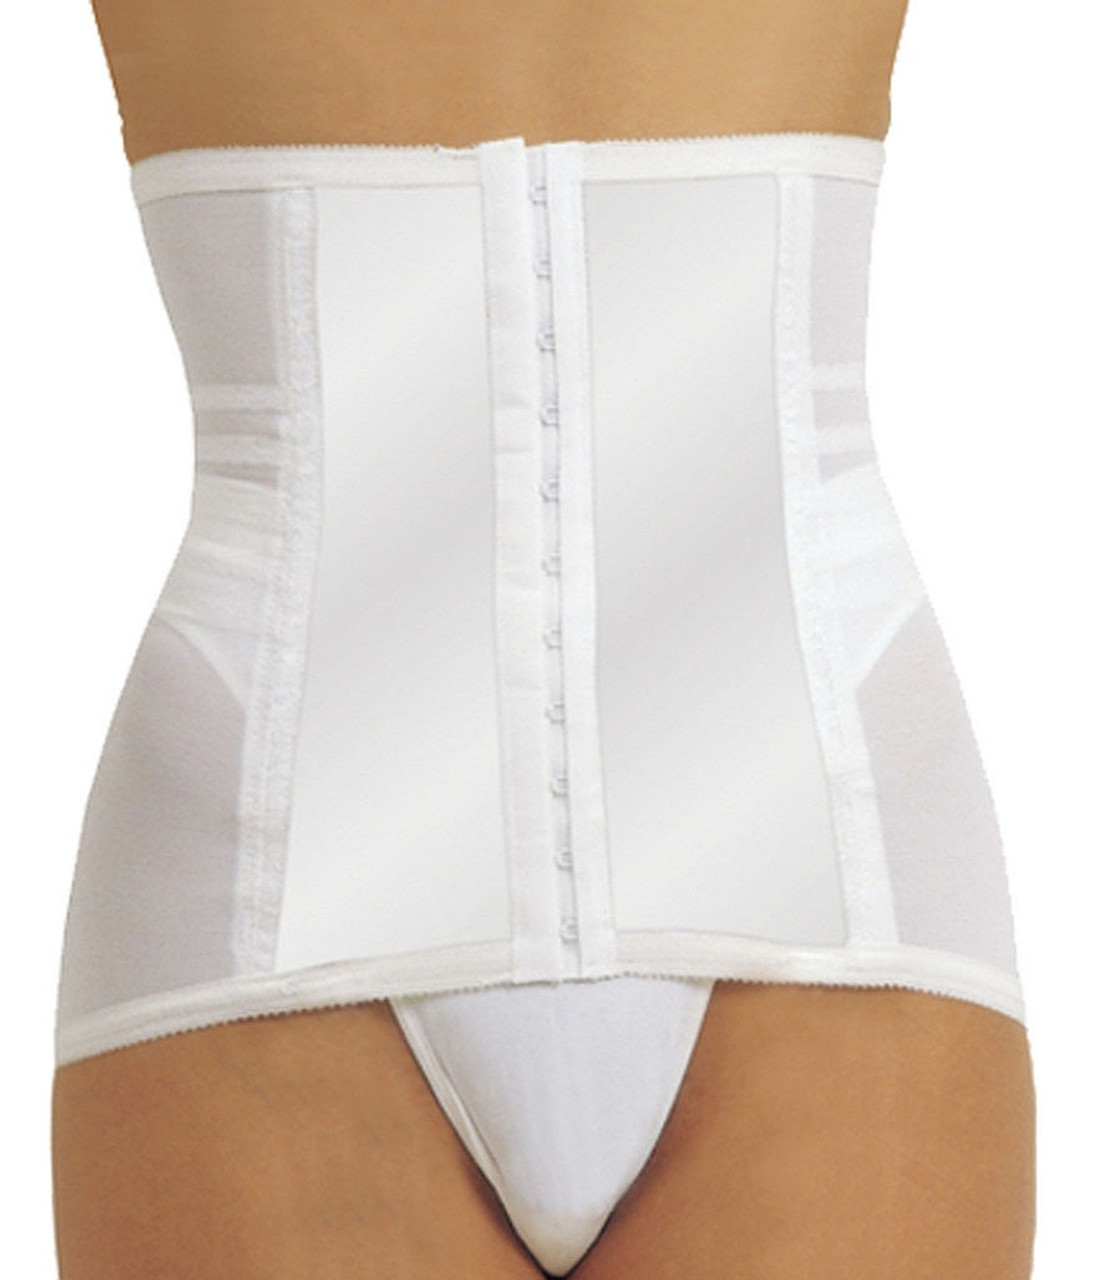 Women's Rago 9051 Shapette Body Briefer with Contour Bands (White 38B)